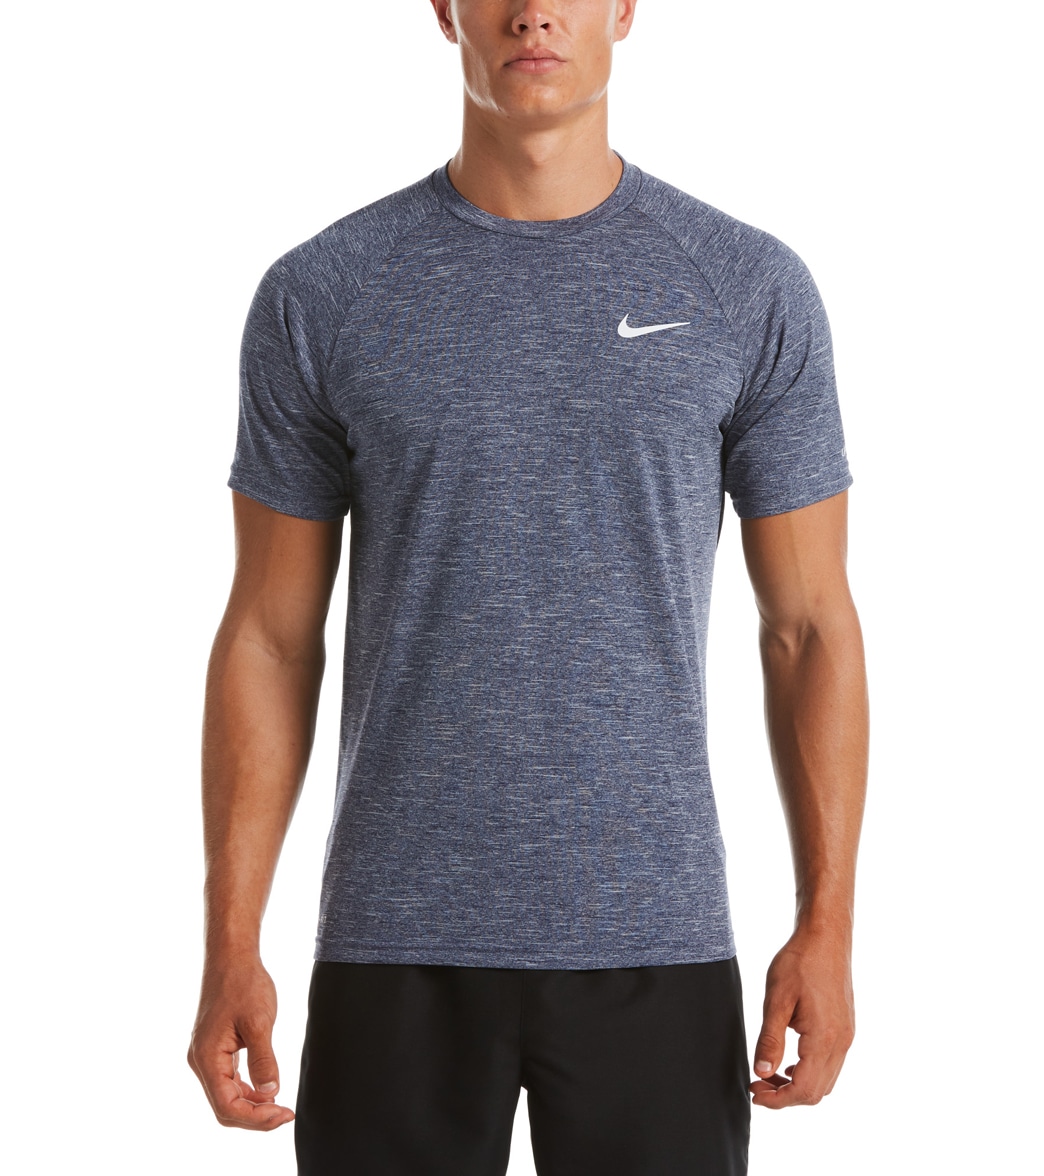 Nike Men's Heather Short Sleeve Hydroguard Shirt - Midnight Navy Small Polyester - Swimoutlet.com